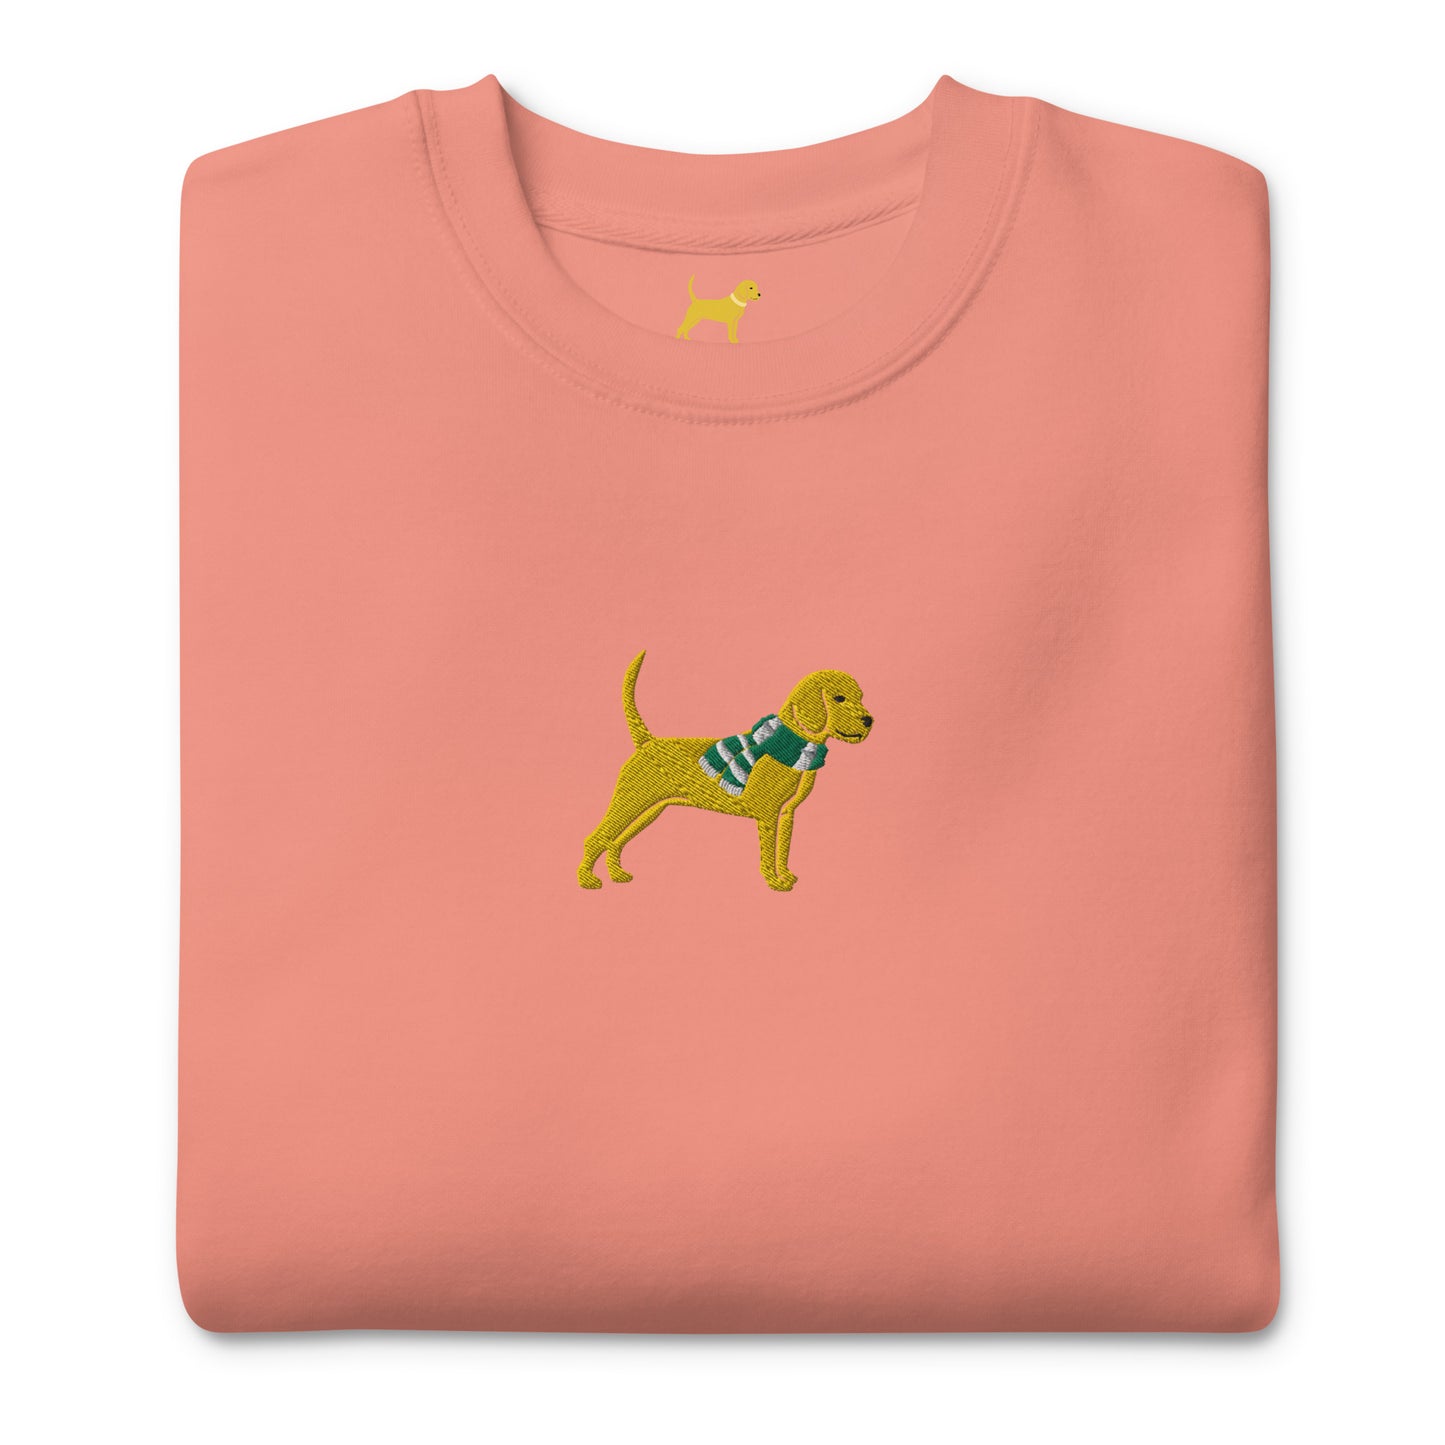 Unleashed Life Yellow Dog with scarf embroidered crewneck